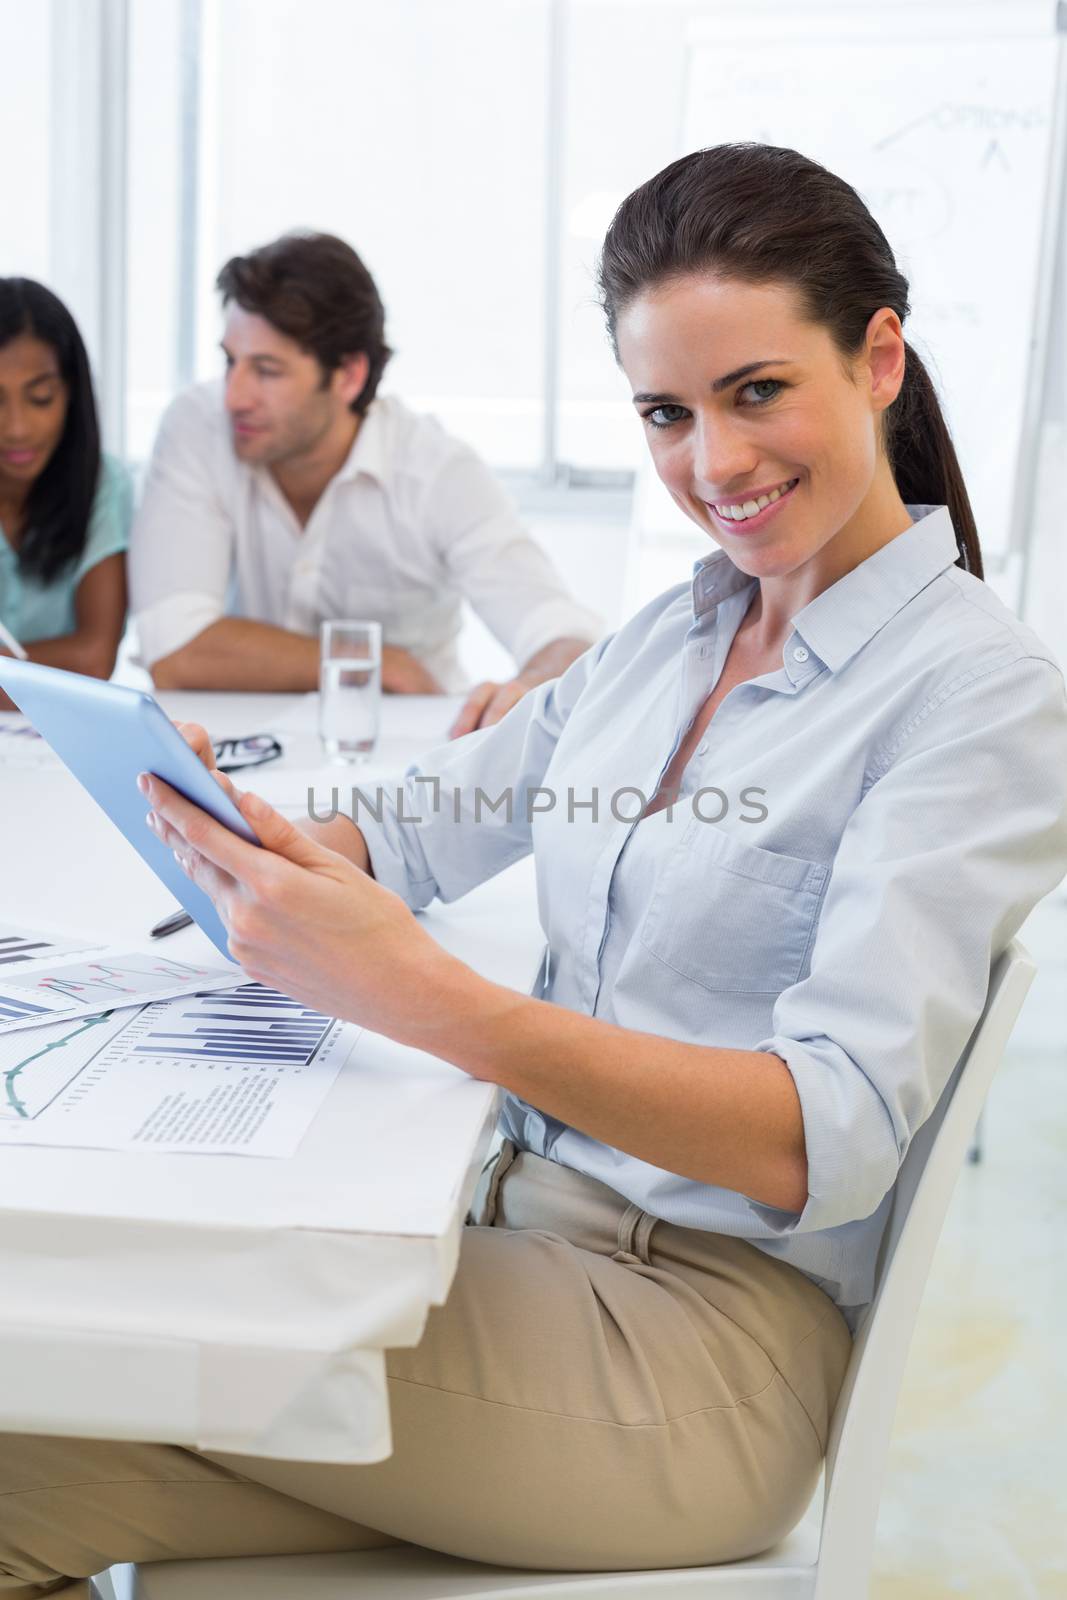 Attractive businesswoman using tablet while her coworkers are working hard behind her